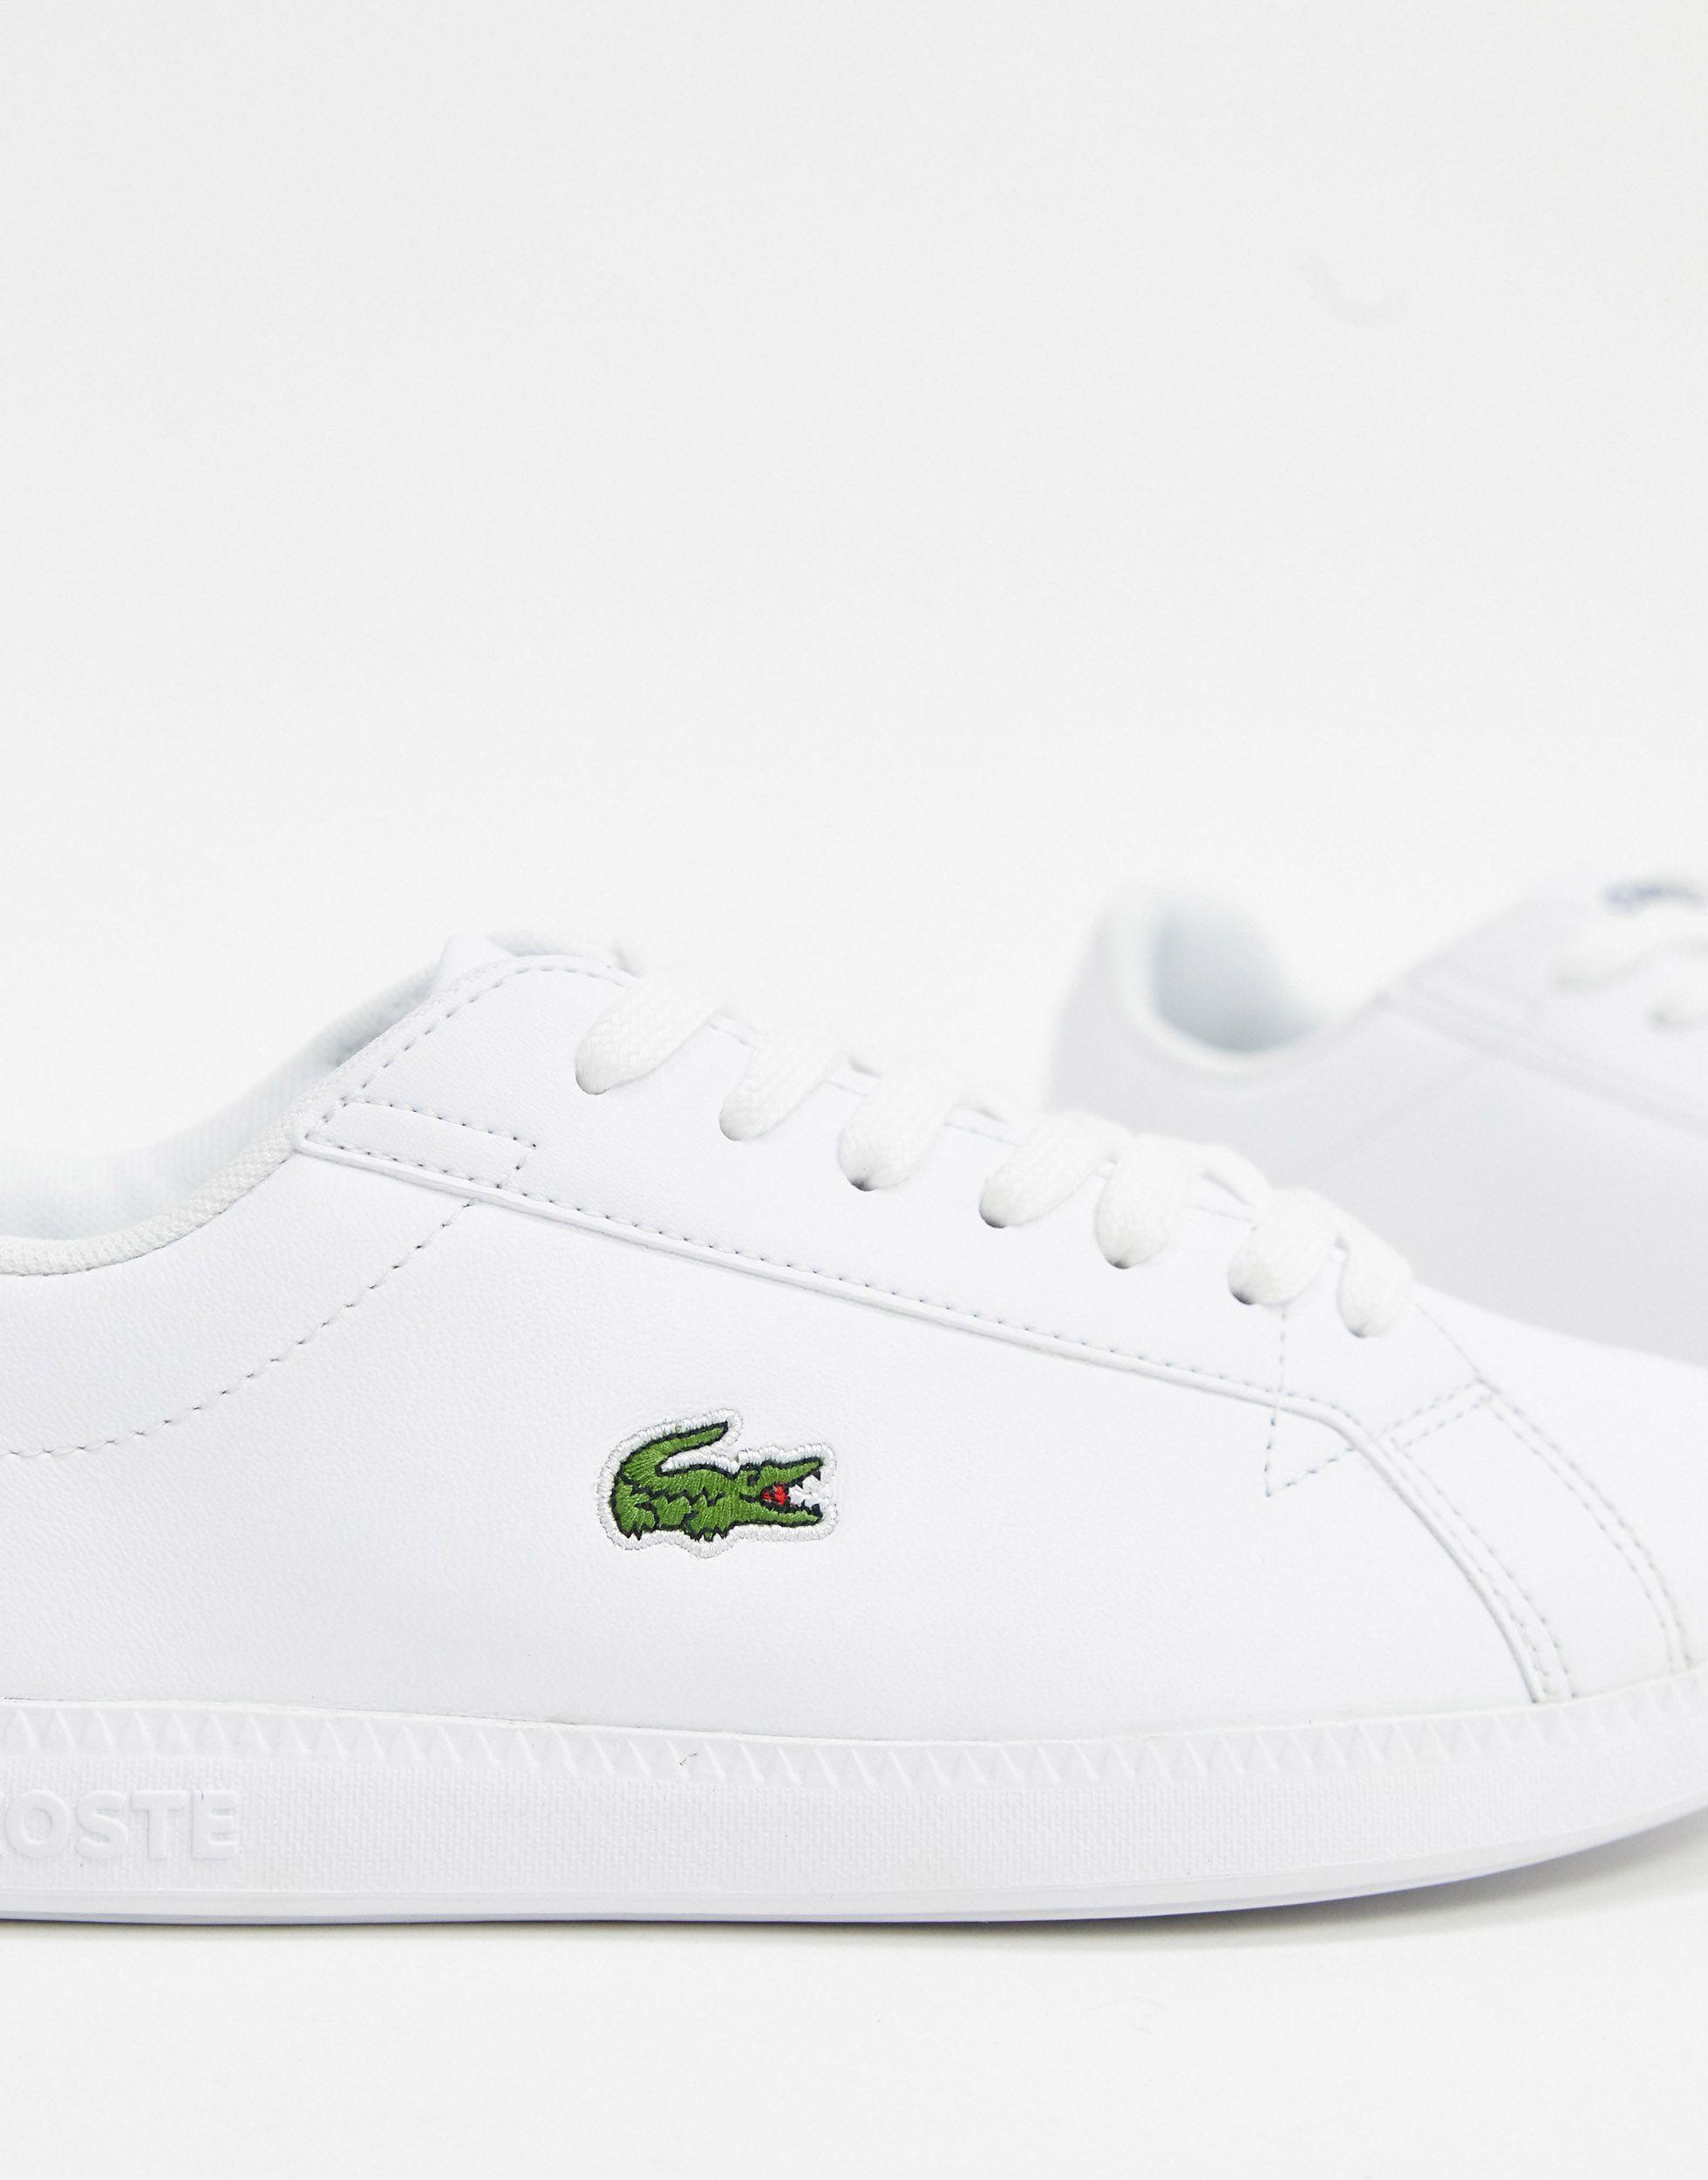 komedie Hula hop Standard Lacoste Graduate Bl 1 Leather Trainers in White | Lyst